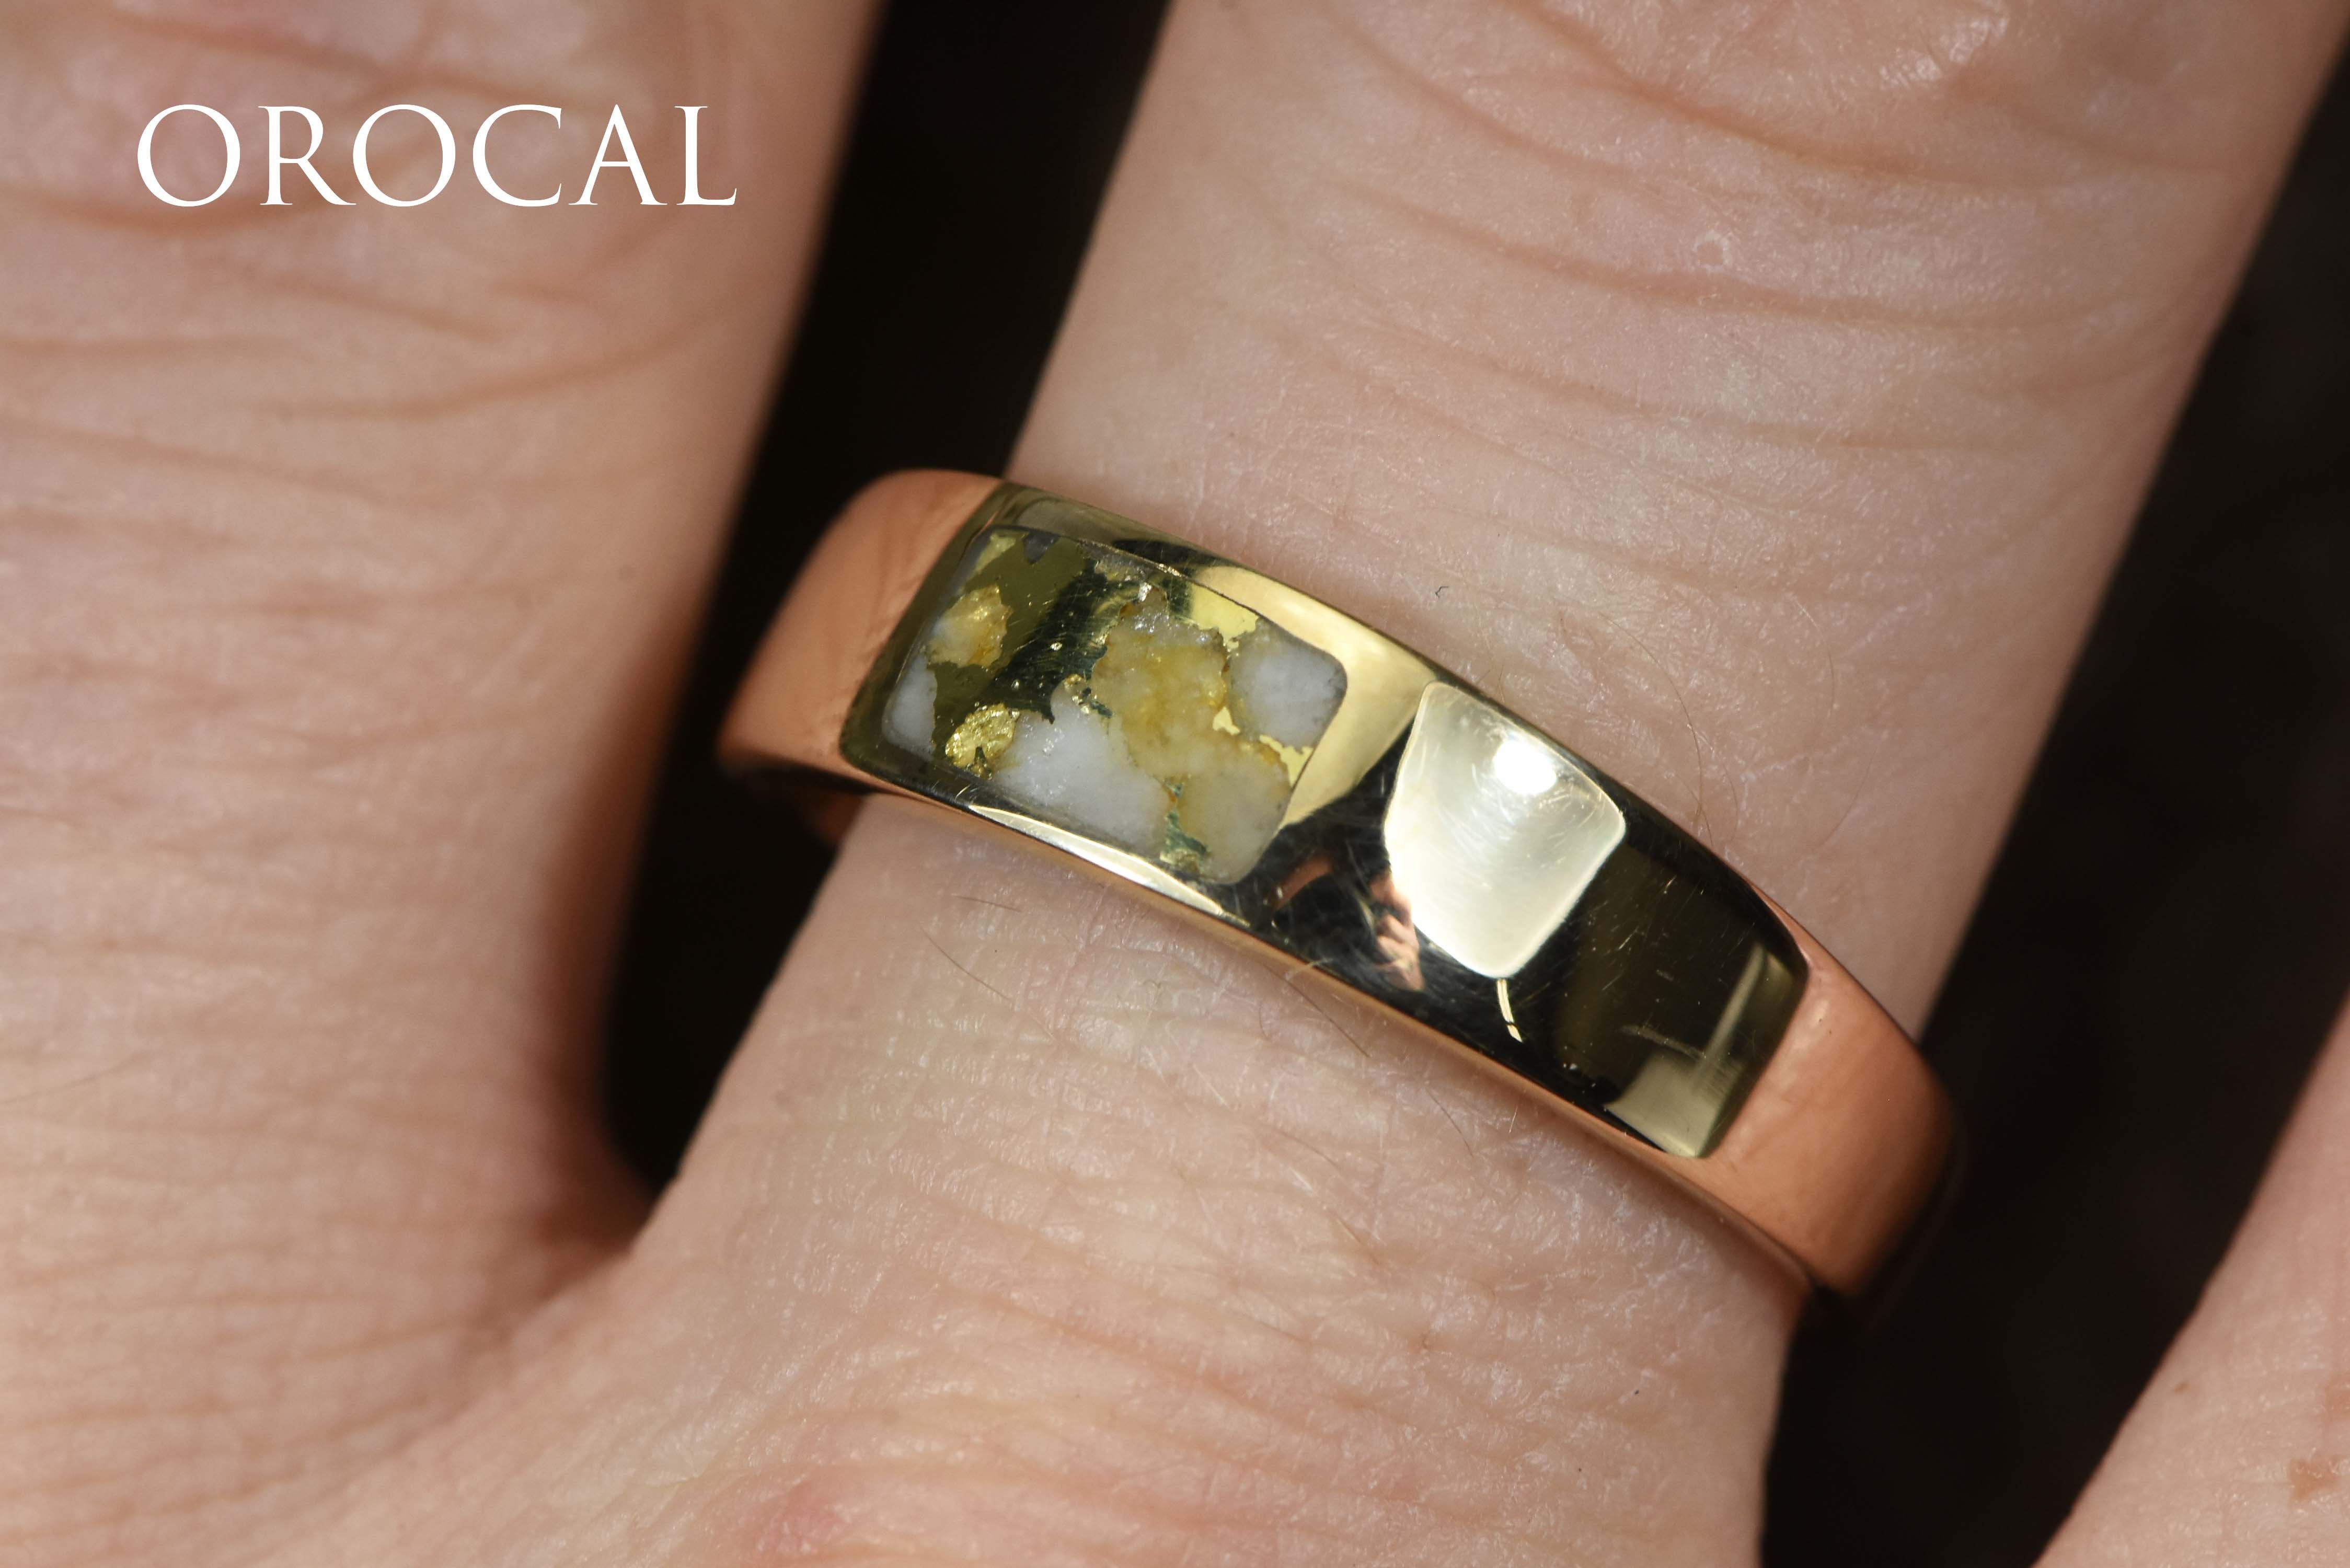 Gold Quartz Ring "Orocal" RM652Q1 Genuine Hand Crafted Jewelry - 14K Gold Casting